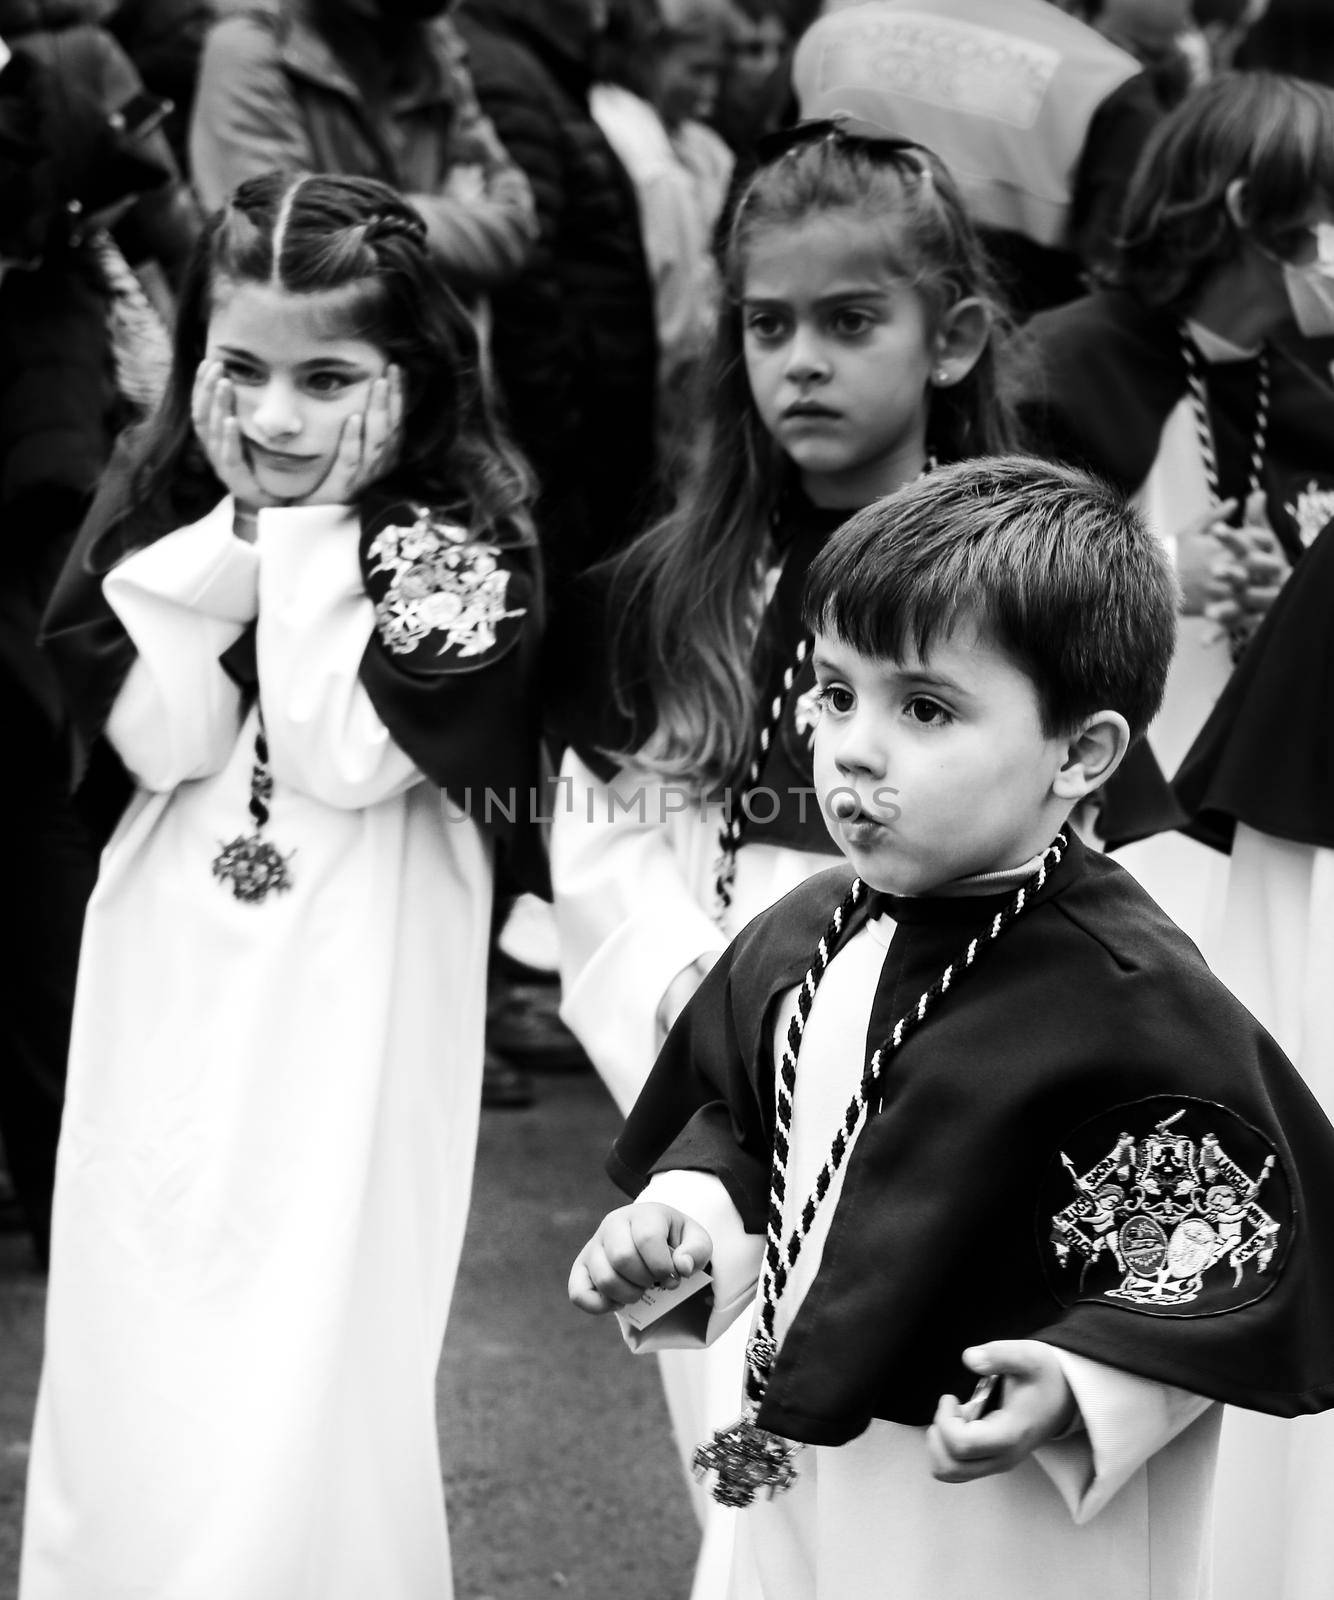 Children on Easter Parade in procession of Holy Week in Elche, Spain by soniabonet